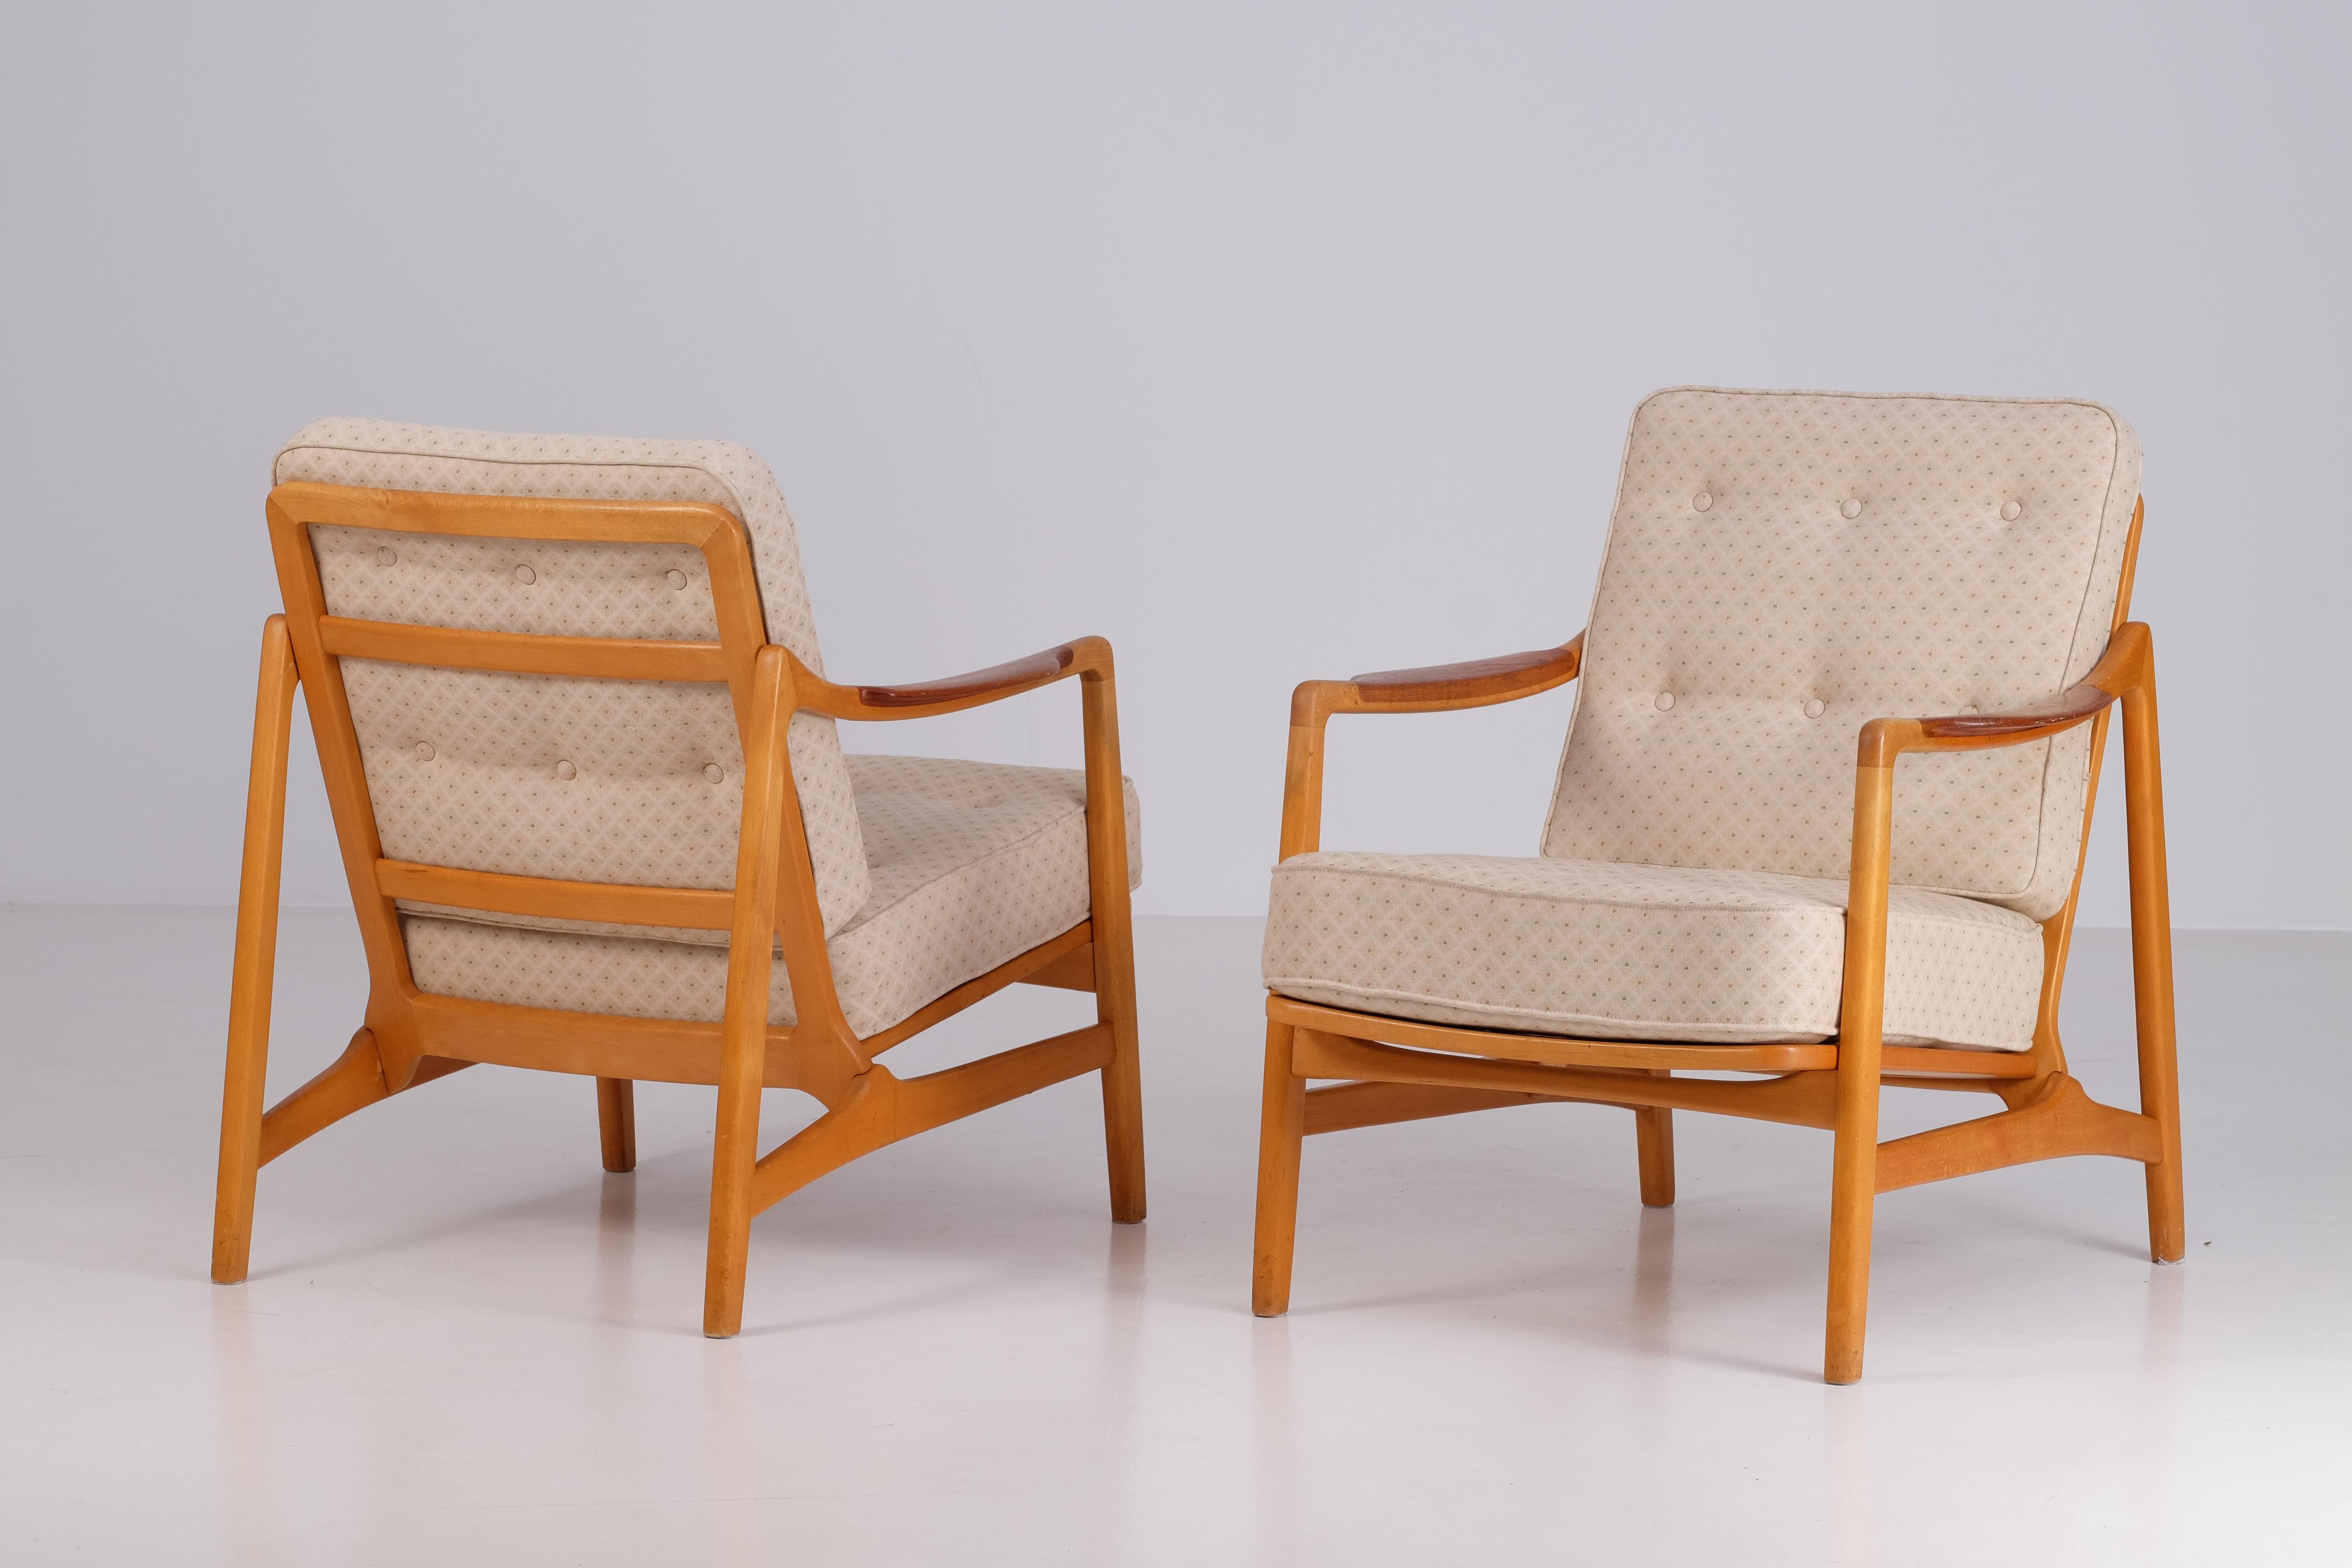 Pair of Tove and Edvard Kindt-Larsen Lounge Chairs, 1960s For Sale 1